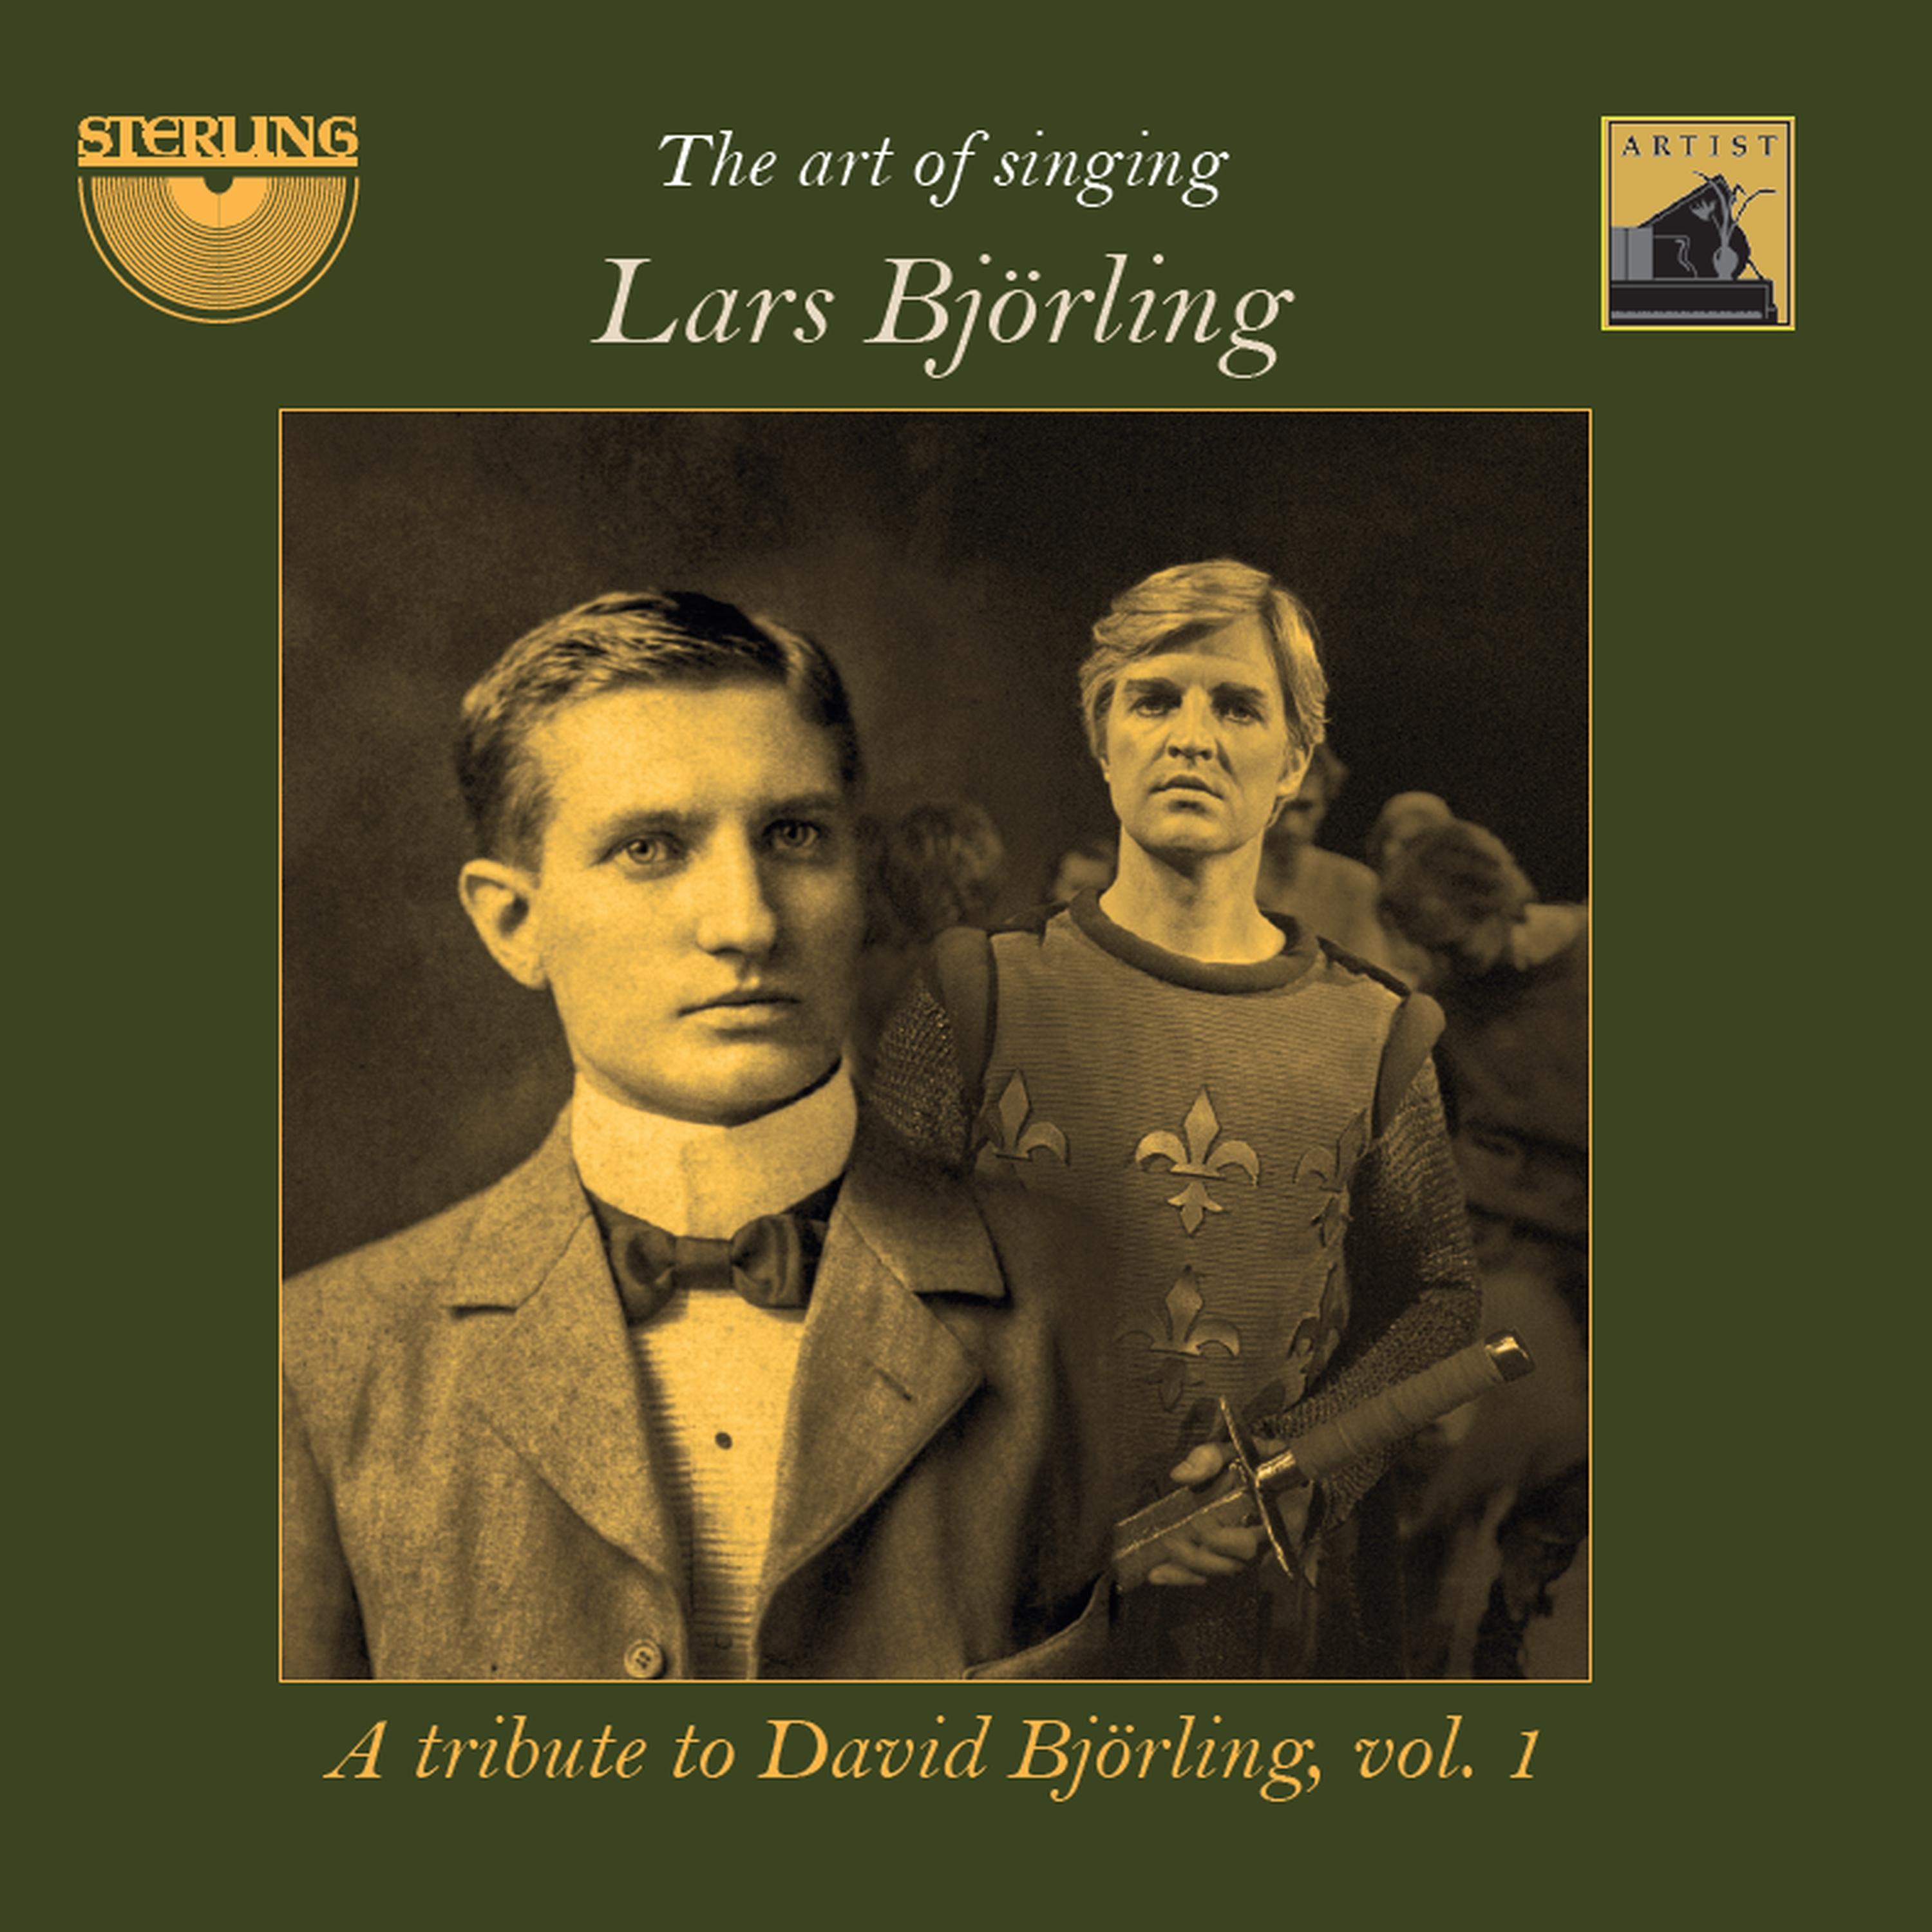 The Art of Singing: A Tribute to David Bj rling